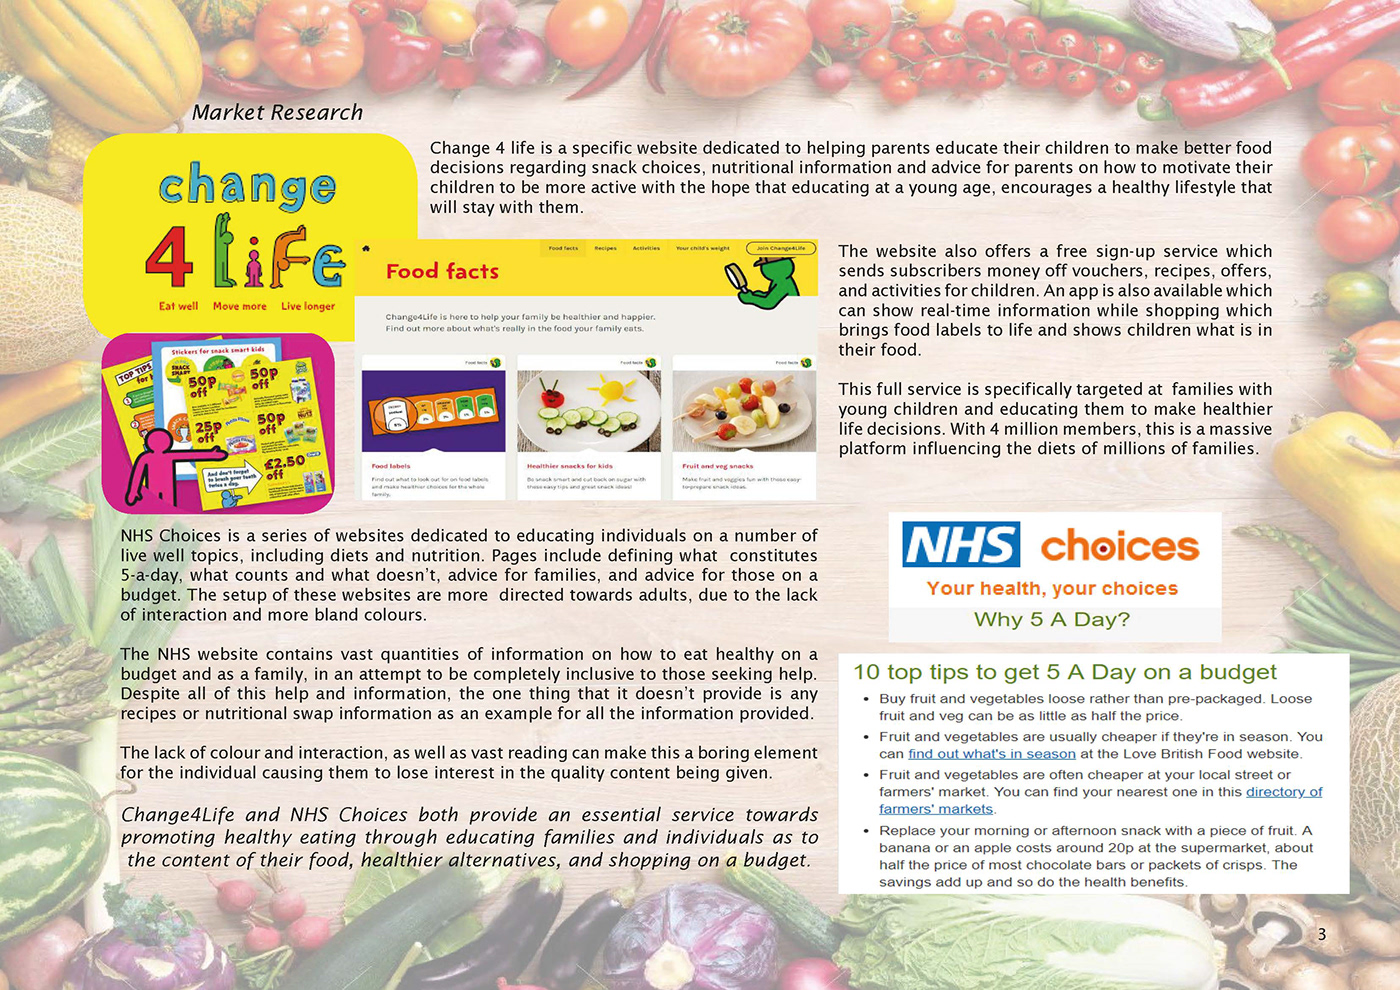 lifestyle Health healthy eating Changes product design  Good Choices nutrition 5 a day